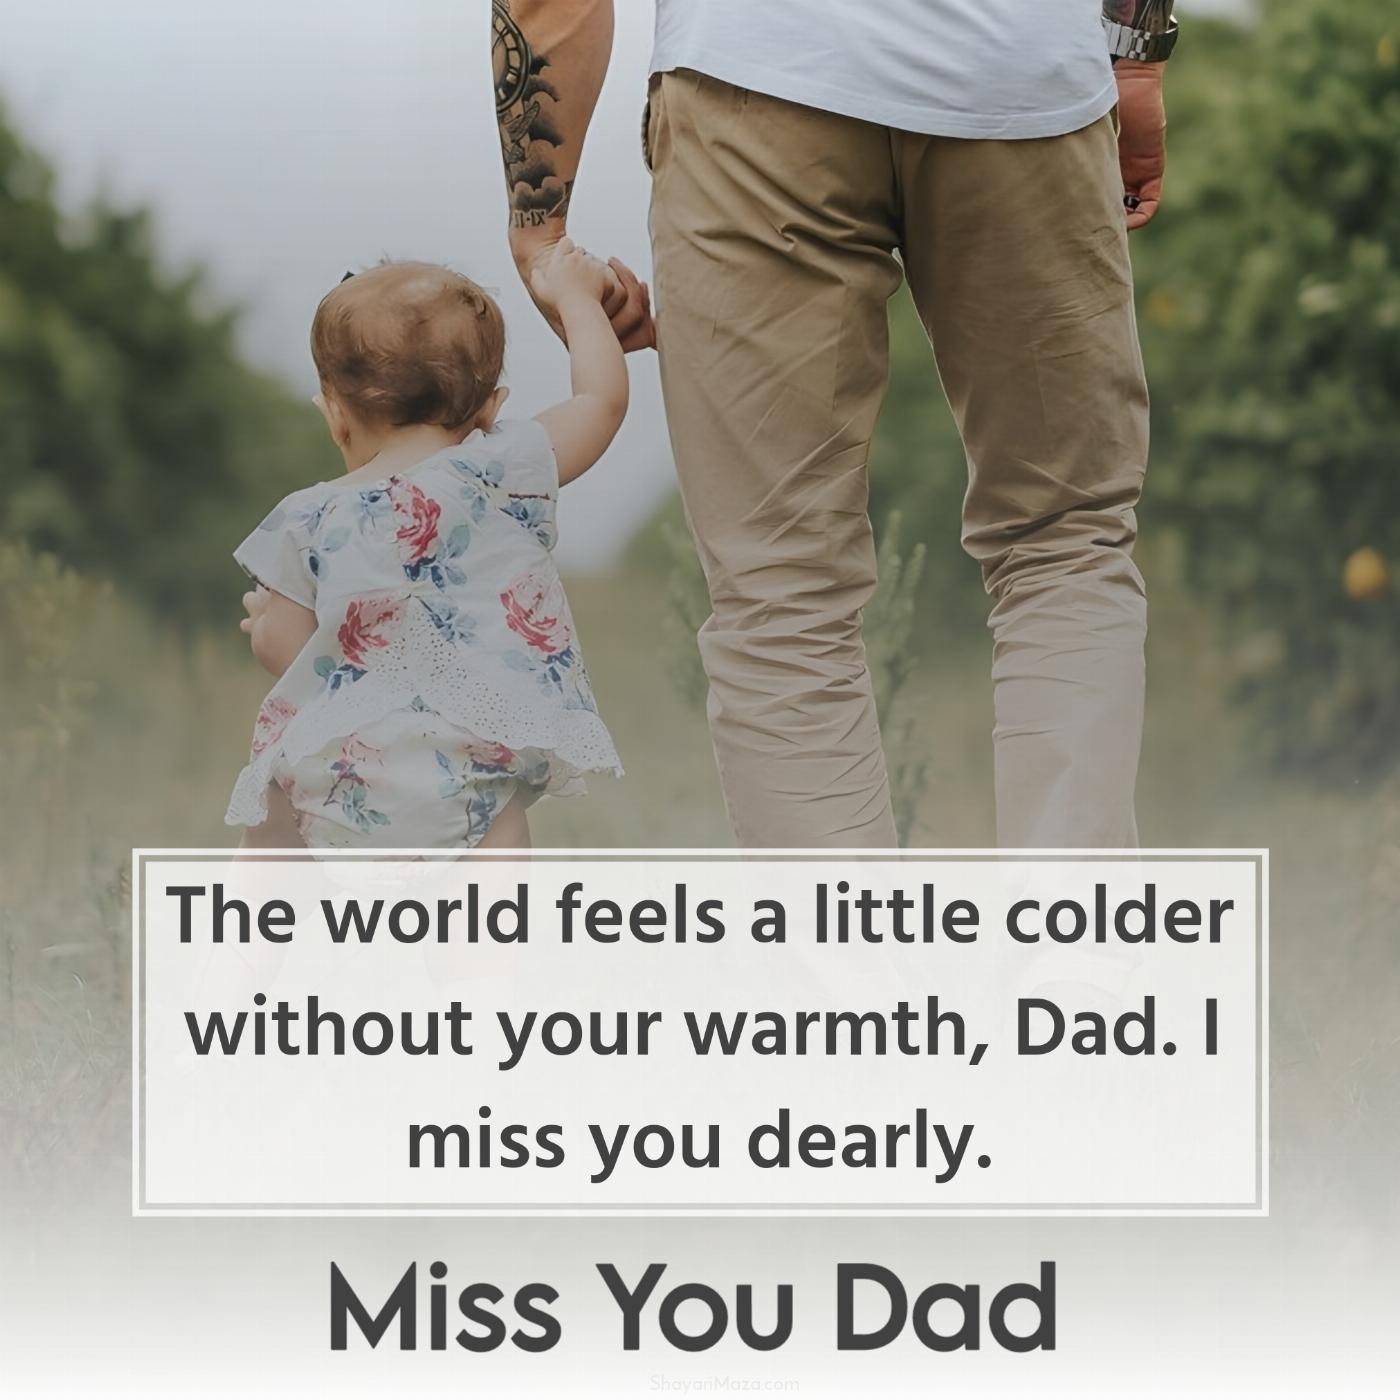 The world feels a little colder without your warmth Dad